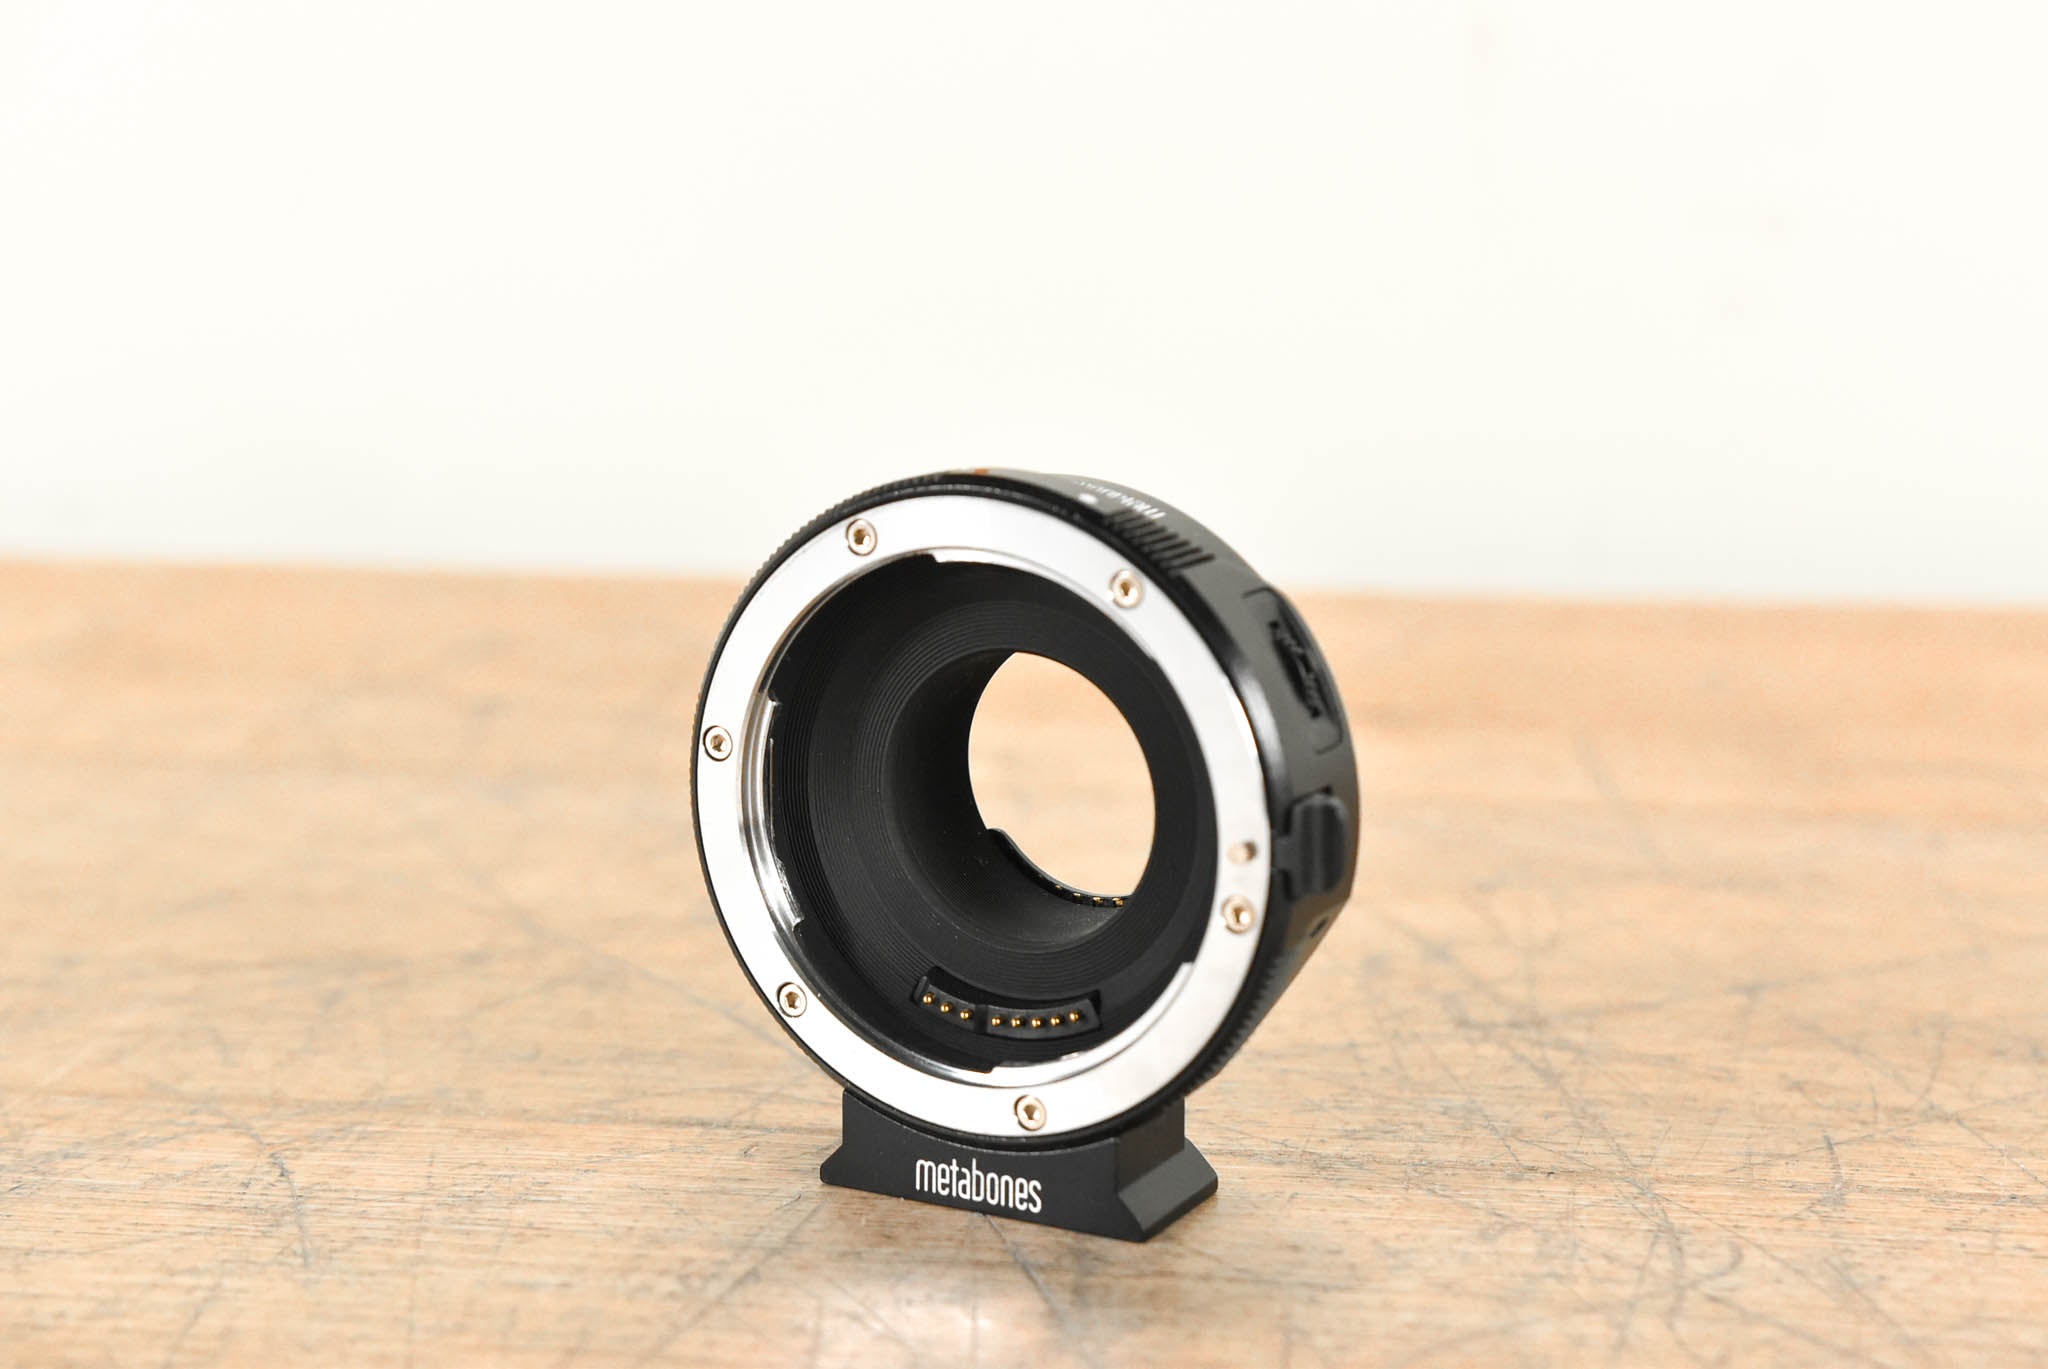 Metabones Canon EF Lens to Micro Four Thirds T Smart Adapter